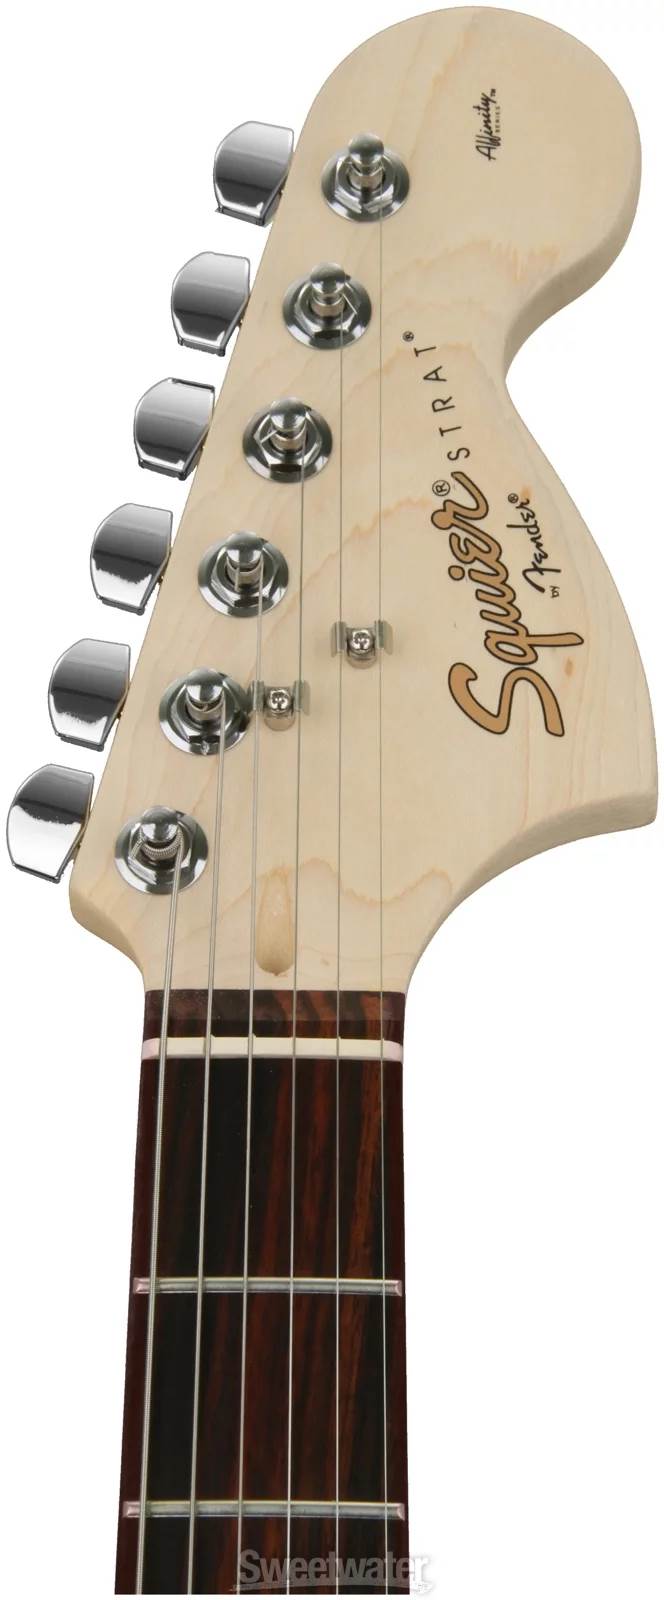 Gold Logo Squier Affinity Stratocaster HSS, Race Green Finish